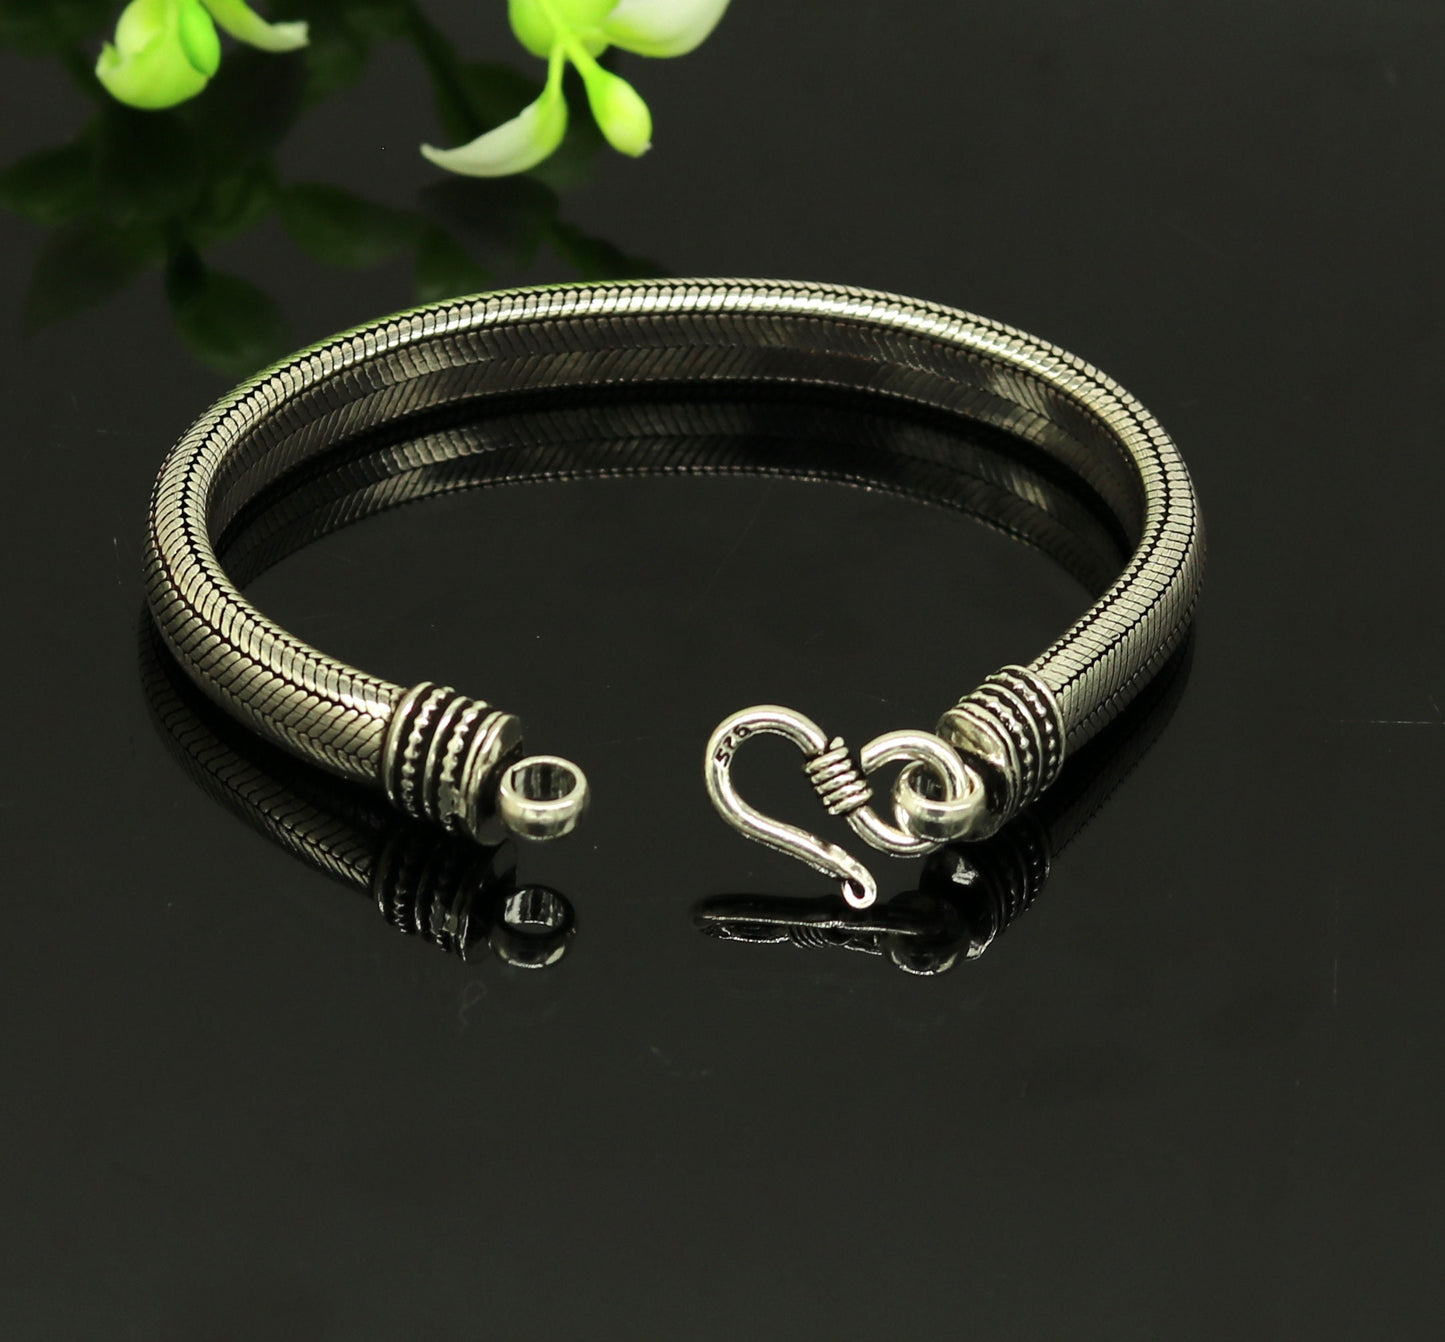 8" solid 925 sterling silver handmade snake chain heavy customized D shape half round design bracelet, personalized gifting jewelry sbr203 - TRIBAL ORNAMENTS